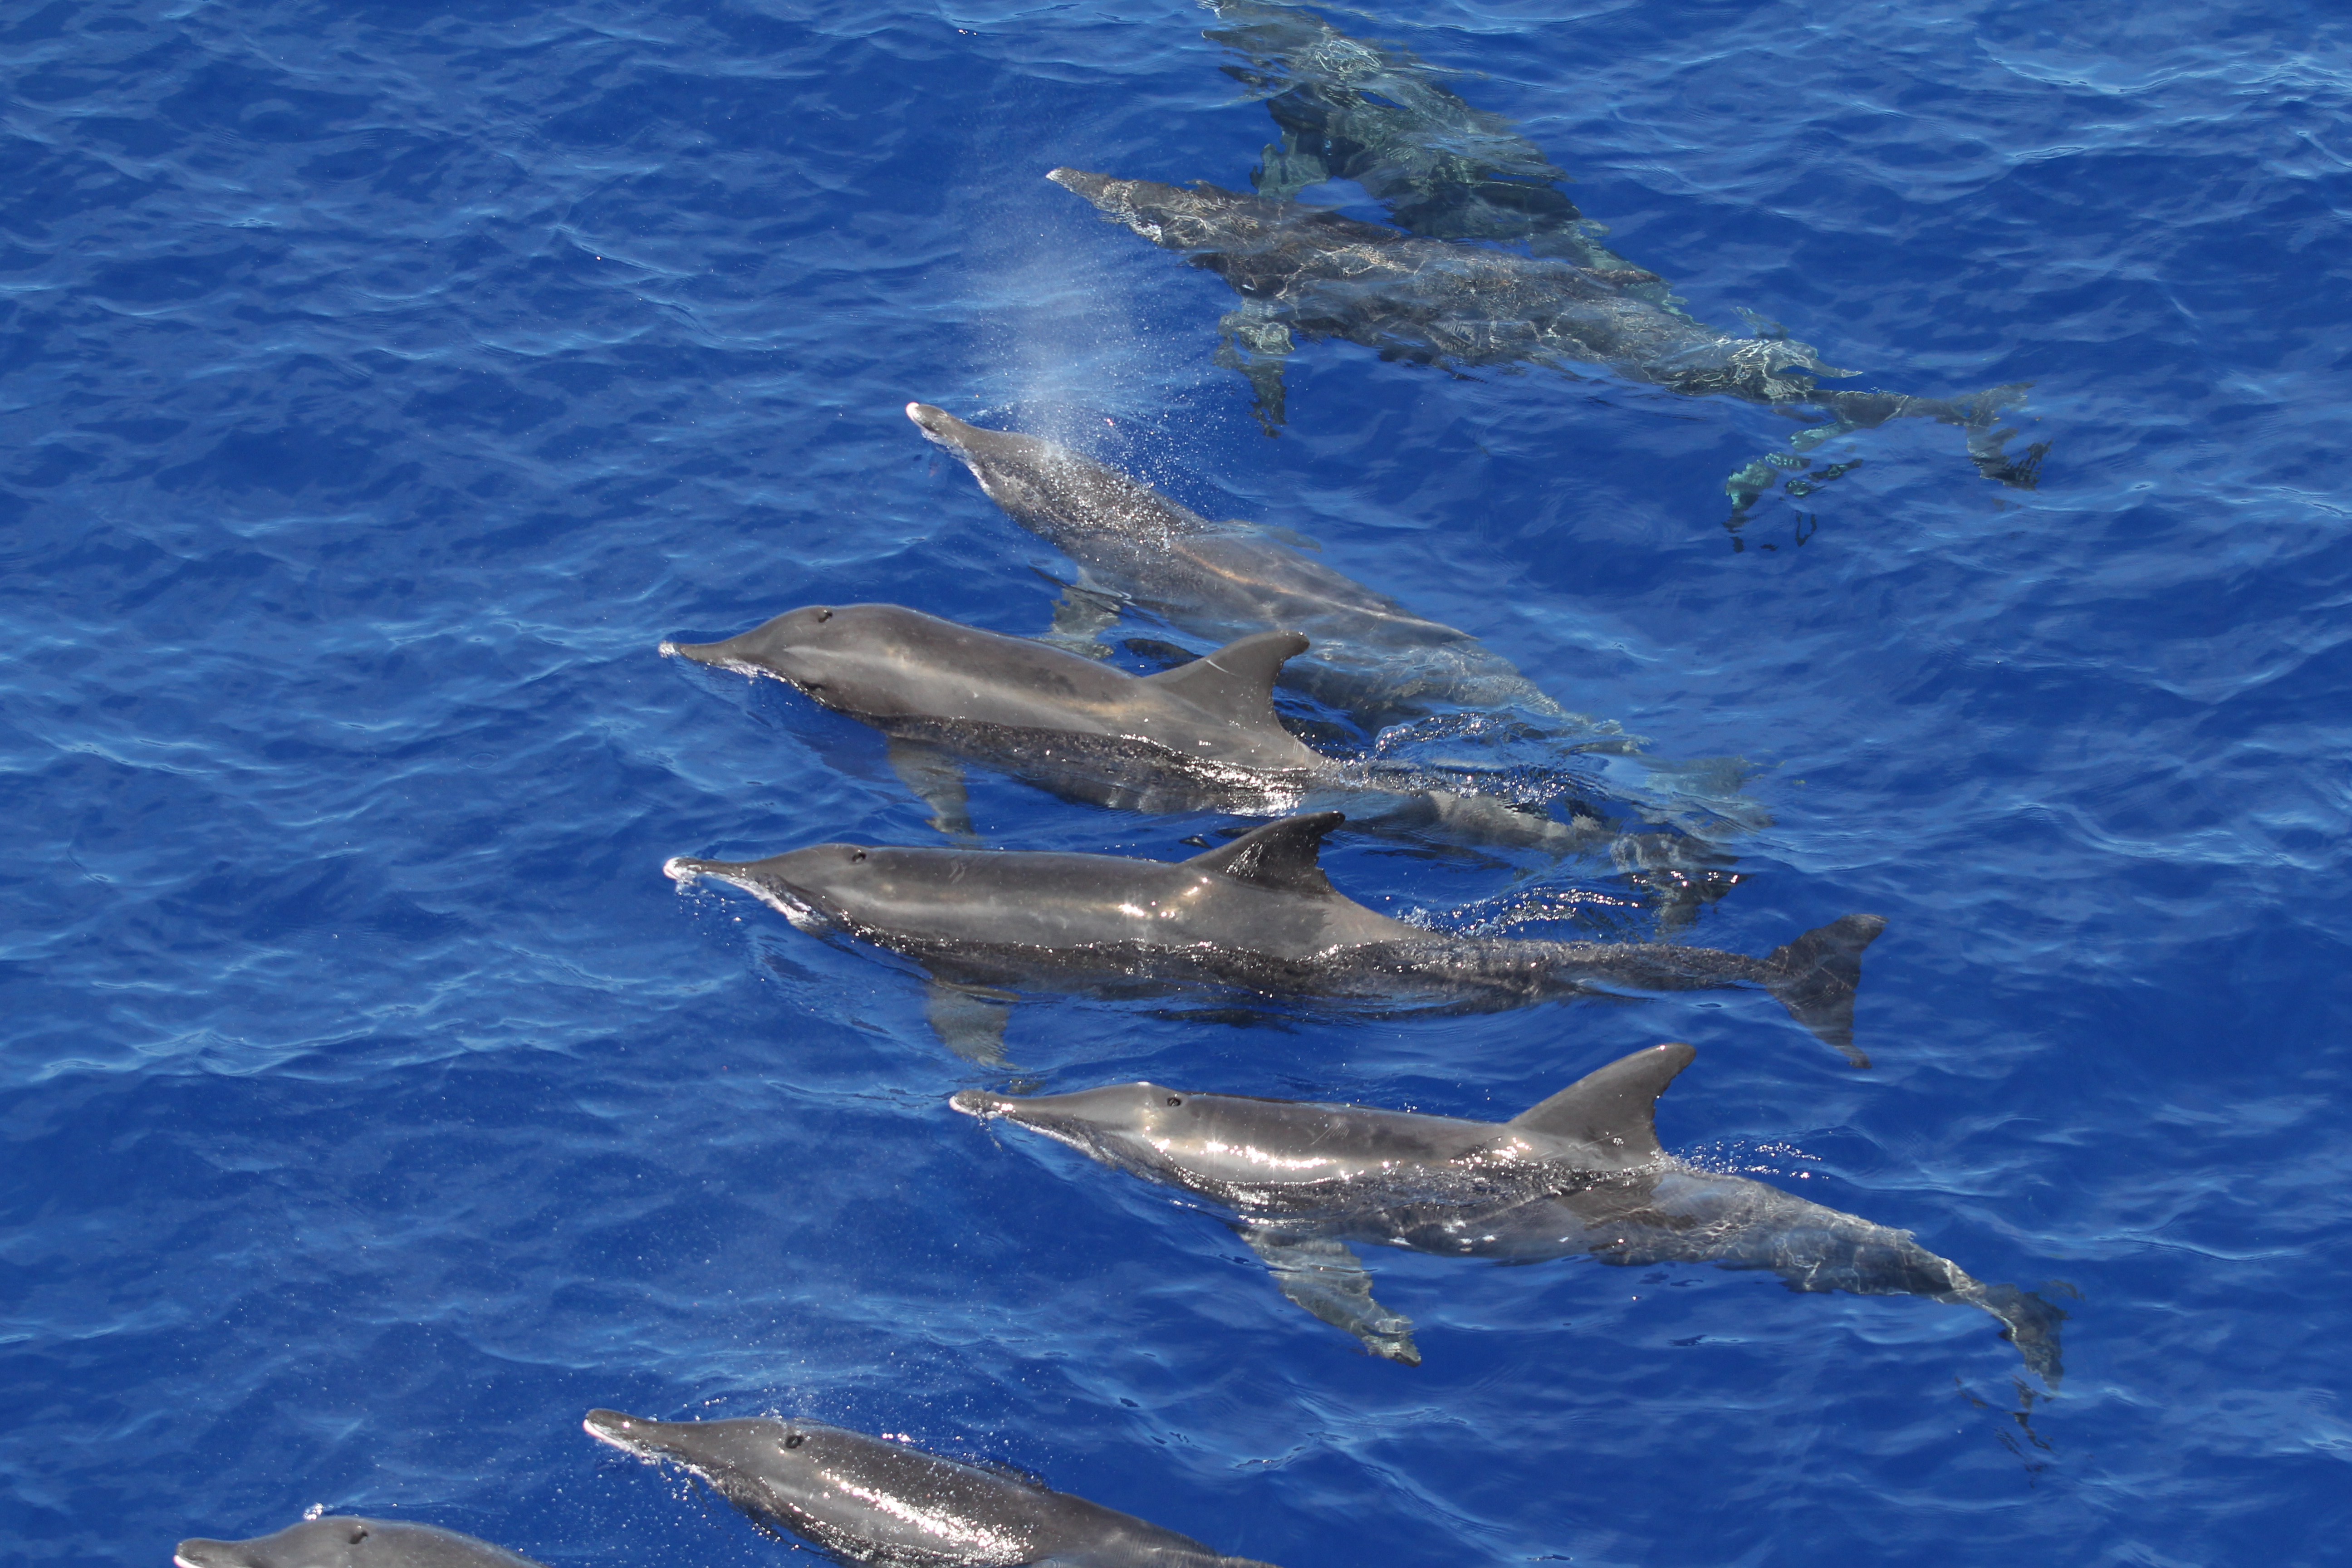 Image: Mission on the High Seas: Hawaiian Islands Cetacean and Ecosystem Assessment Survey